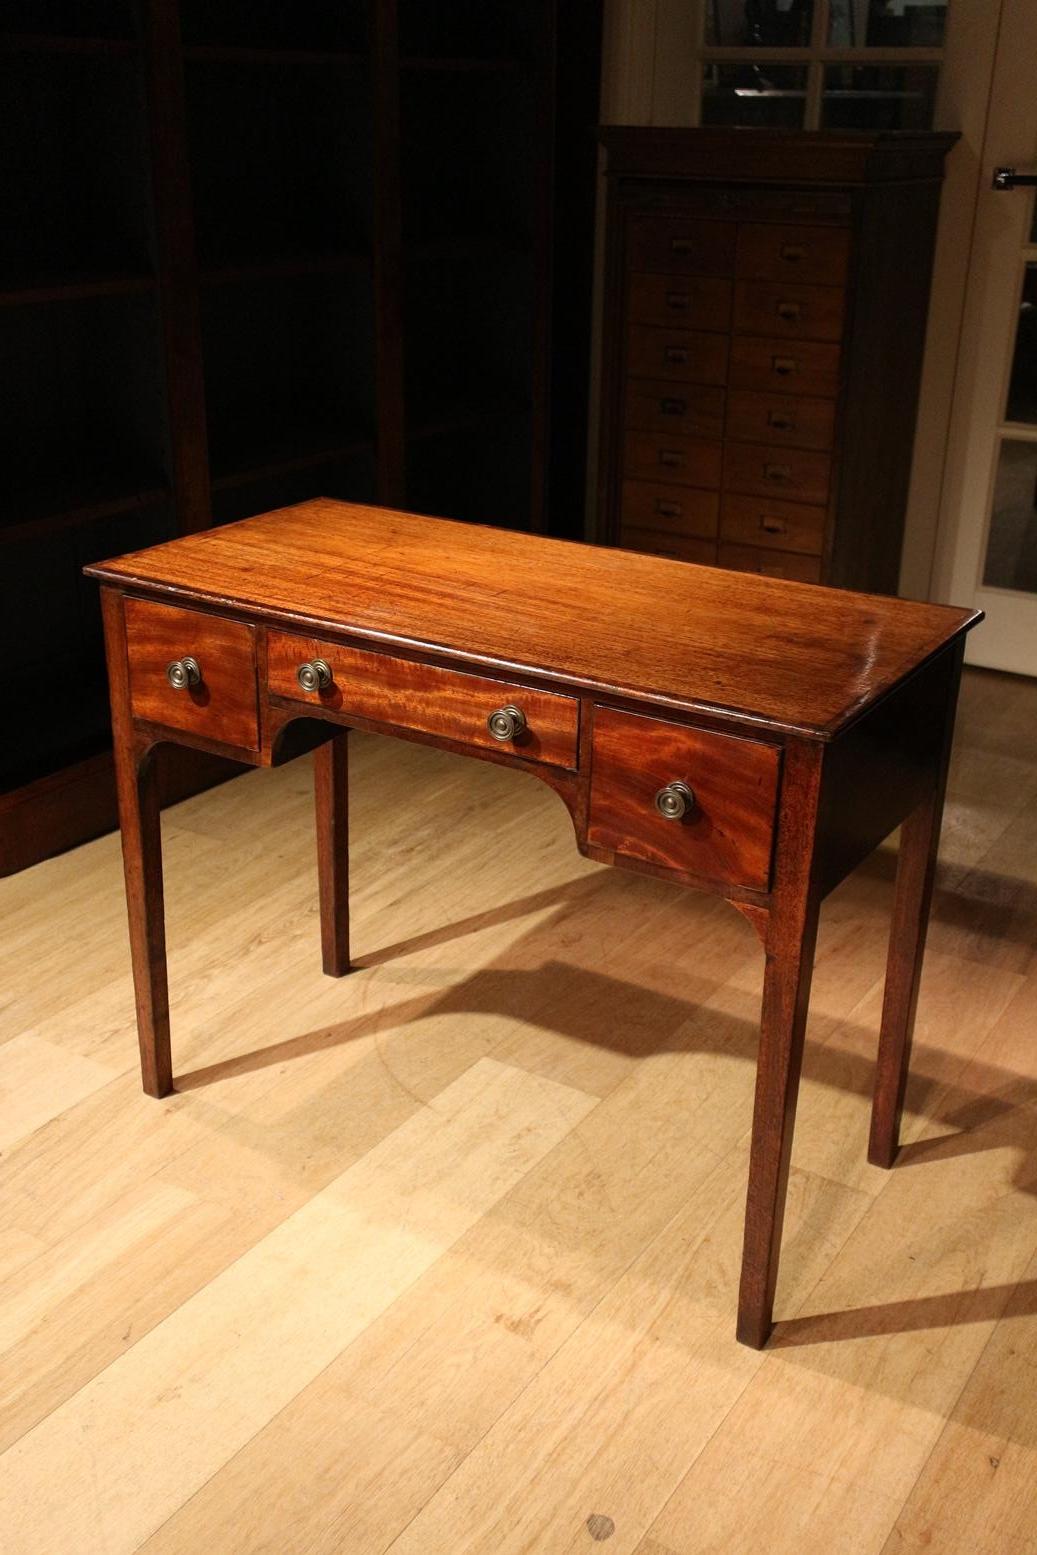 Beautiful small antique Mahogany console table with 3 drawers. The table can also be used as a writing table. The top has a subtle inlay. This specific inlaid edge is called cross banded in English. The table has a beautiful patina. Beautiful and